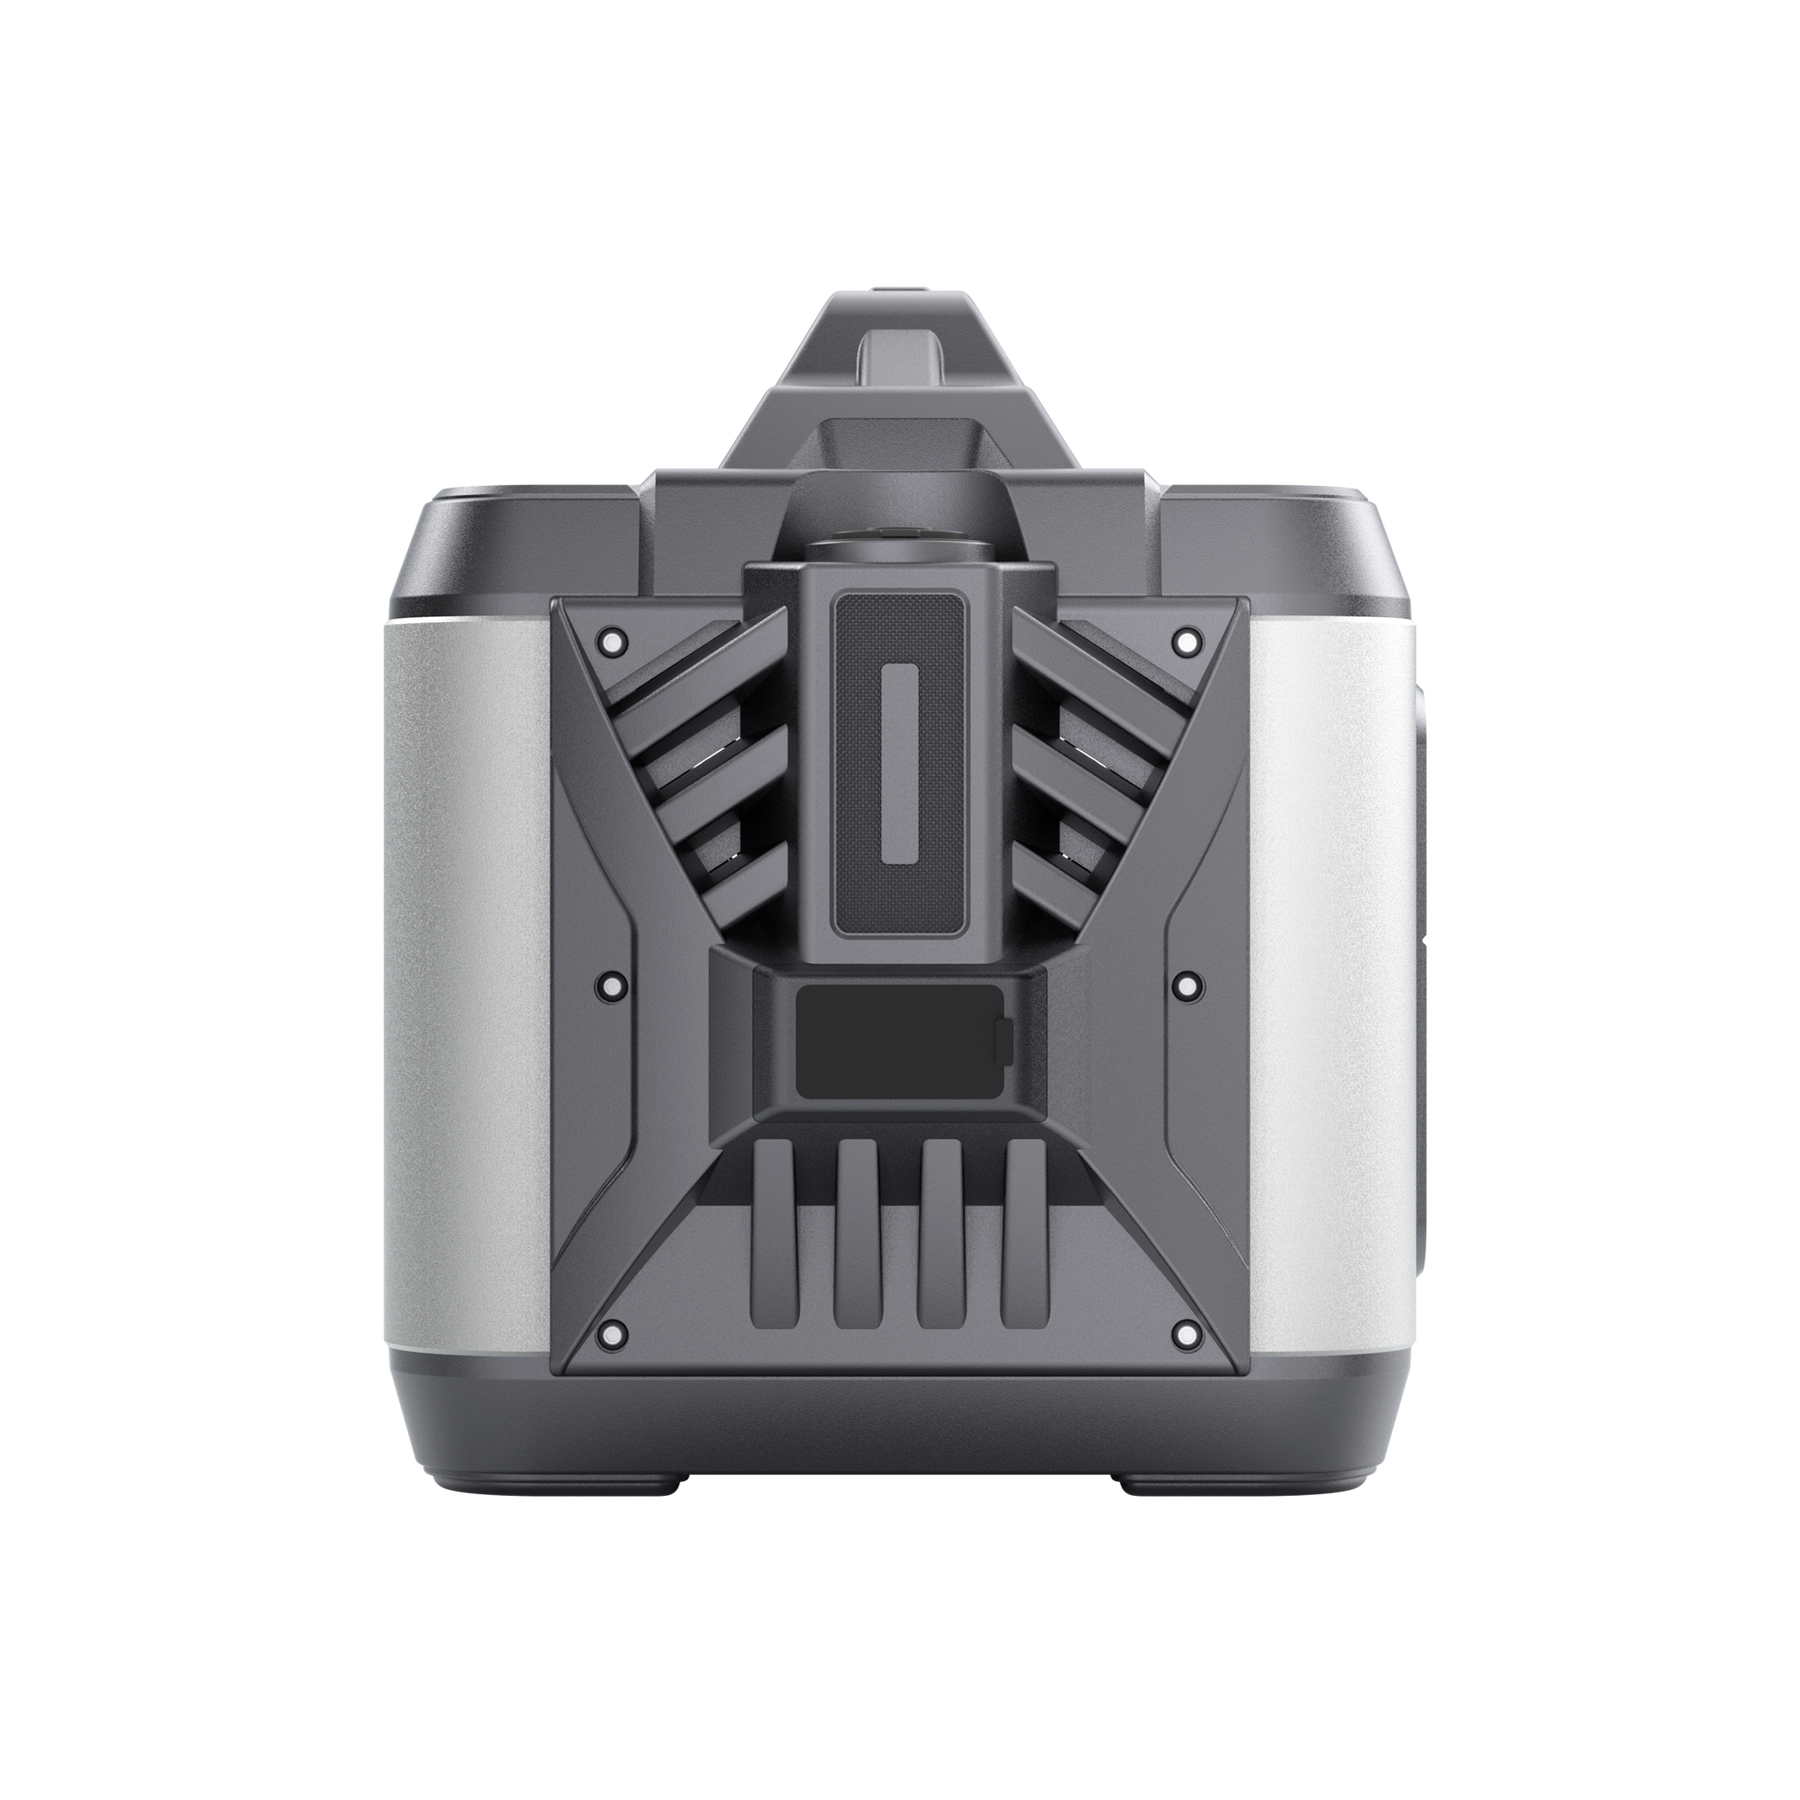 POWEREPUBLIC T1200 portable power station, 1200W 1110Wh, metallic gray aluminum-alloy body with aircraft wing design, a car charger, an Anderson port, and a handle.